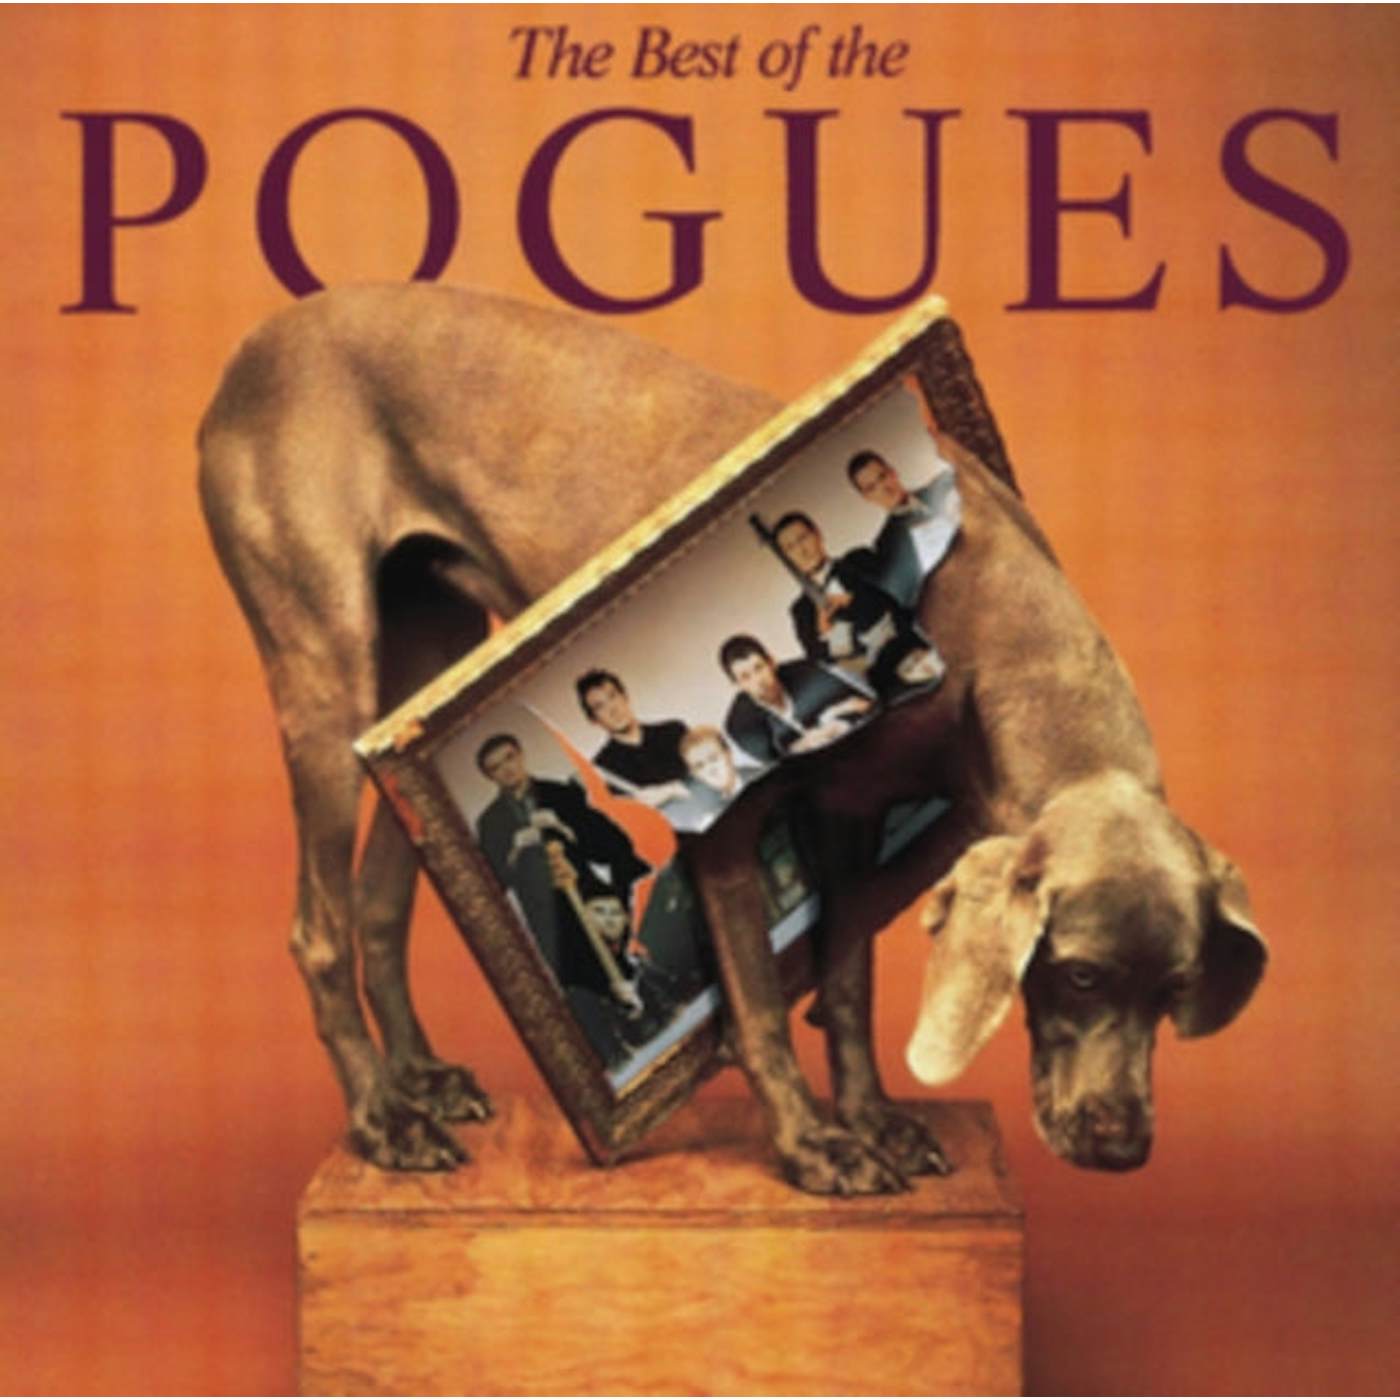 The Pogues LP Vinyl Record - The Best Of The Pogues